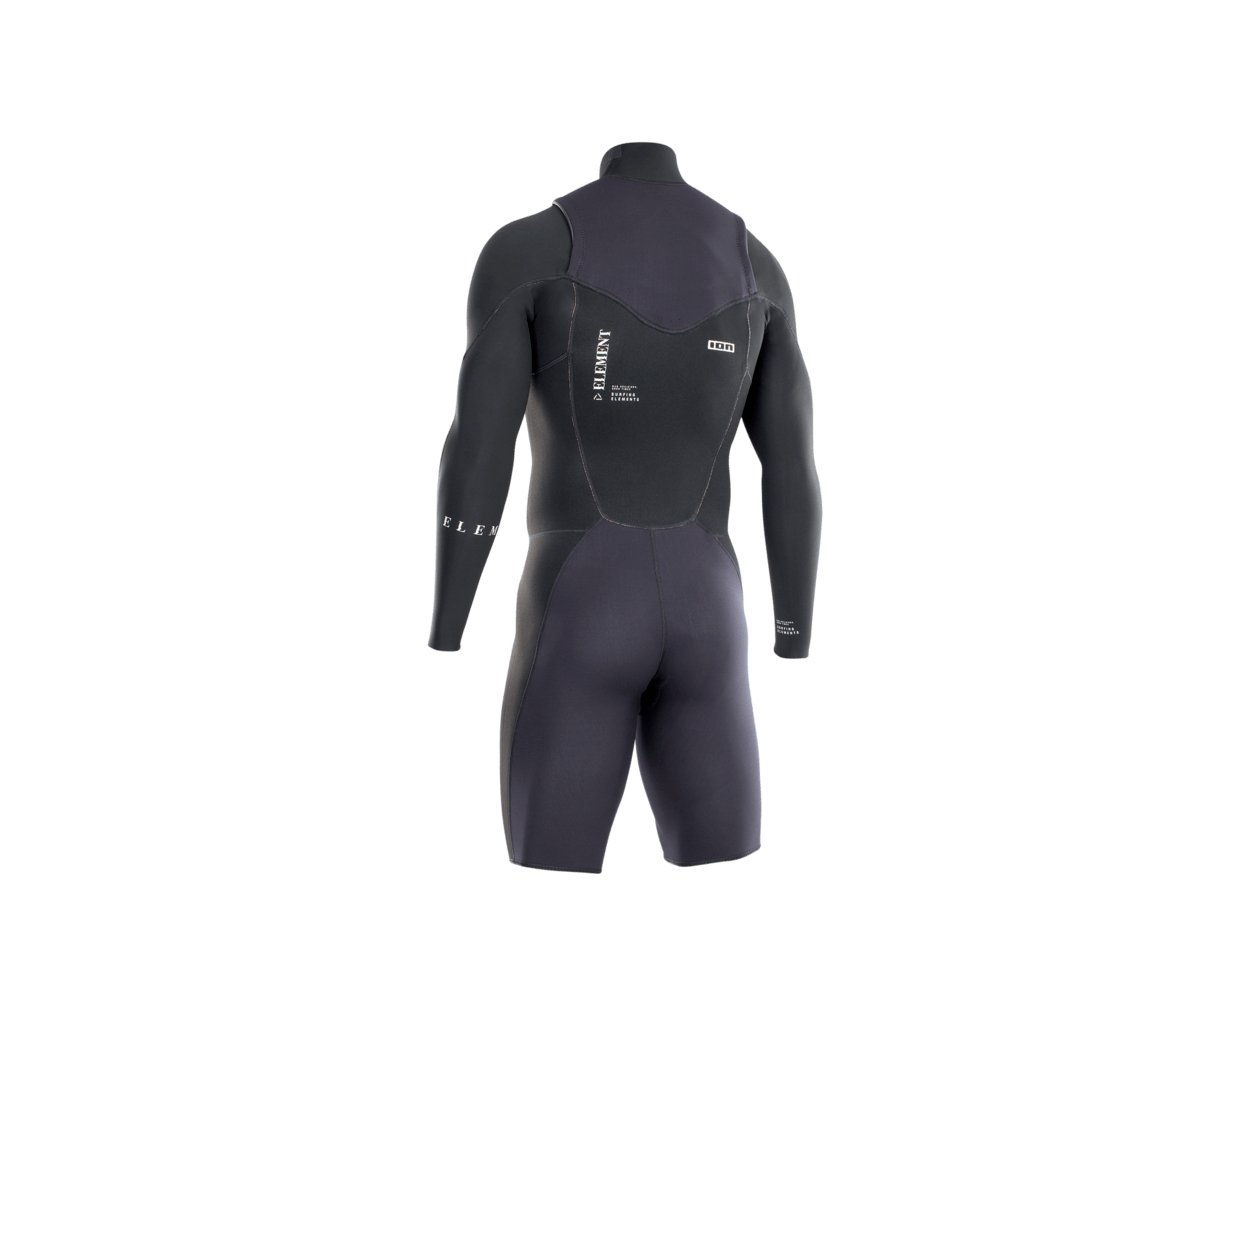 ION Men Wetsuit Element 2/2 Shorty Longsleeve Front Zip 2022 - Worthing Watersports - 9008415951024 - Wetsuits - ION Water